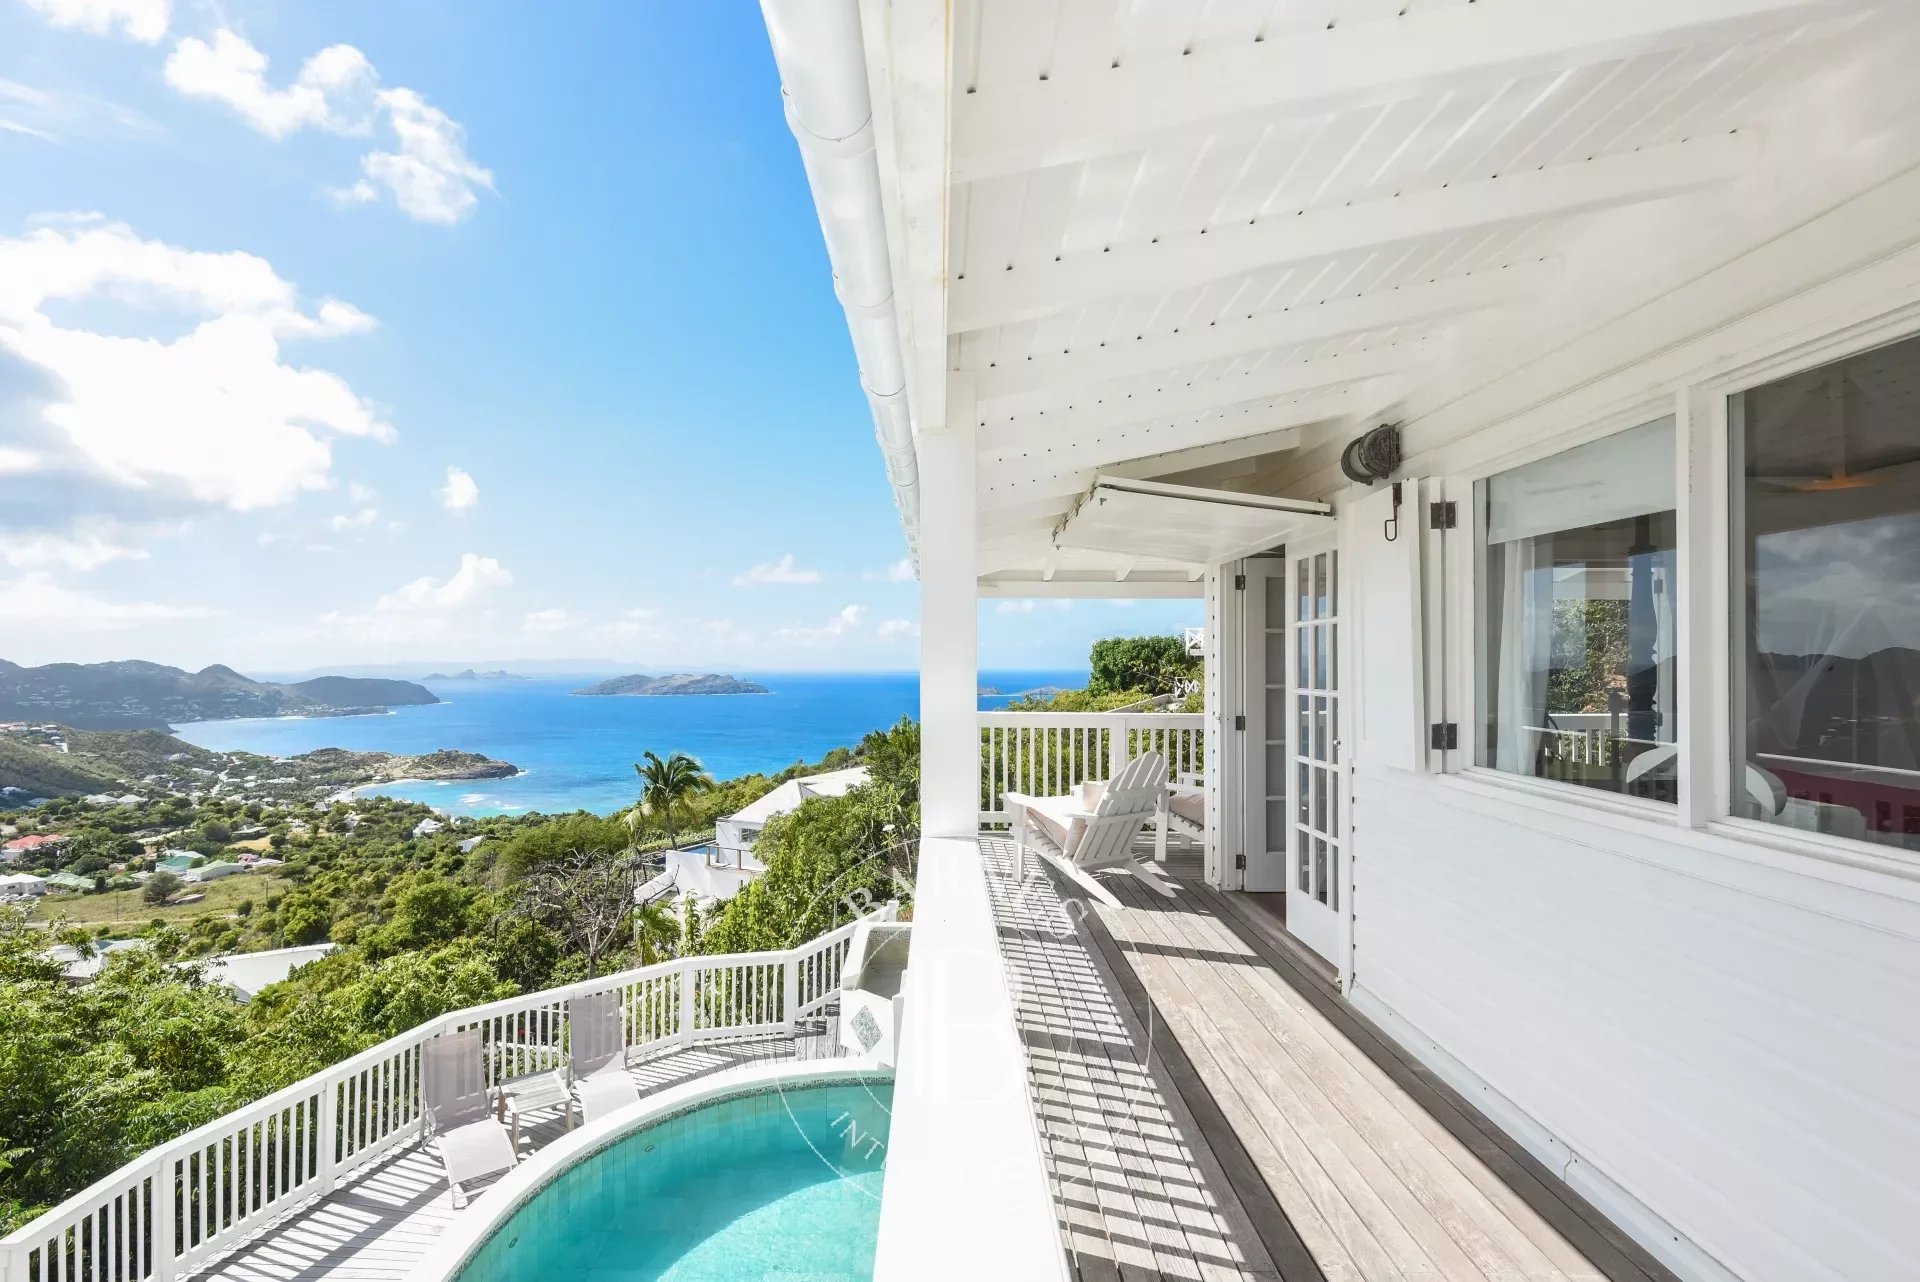 3 -Bedroom Villa in St.Barths - picture 14 title=